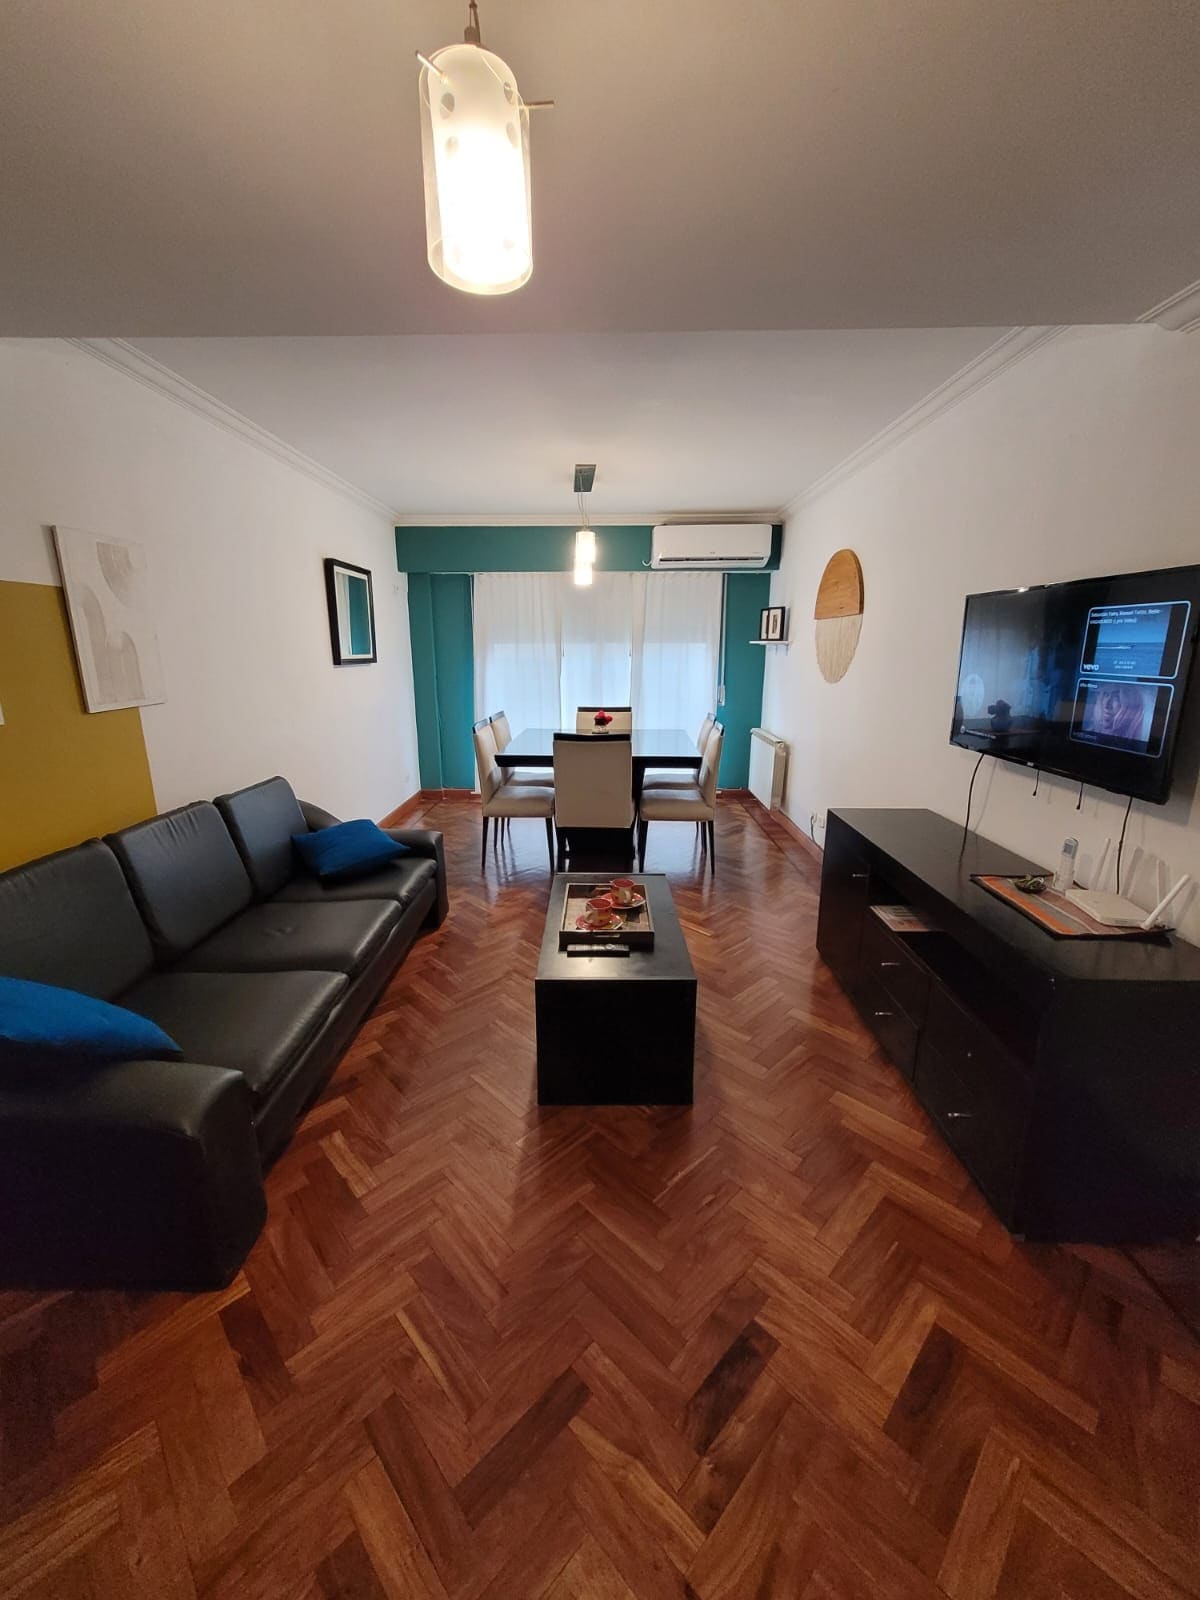 Top Apartment and location 4 pax, 2 rooms